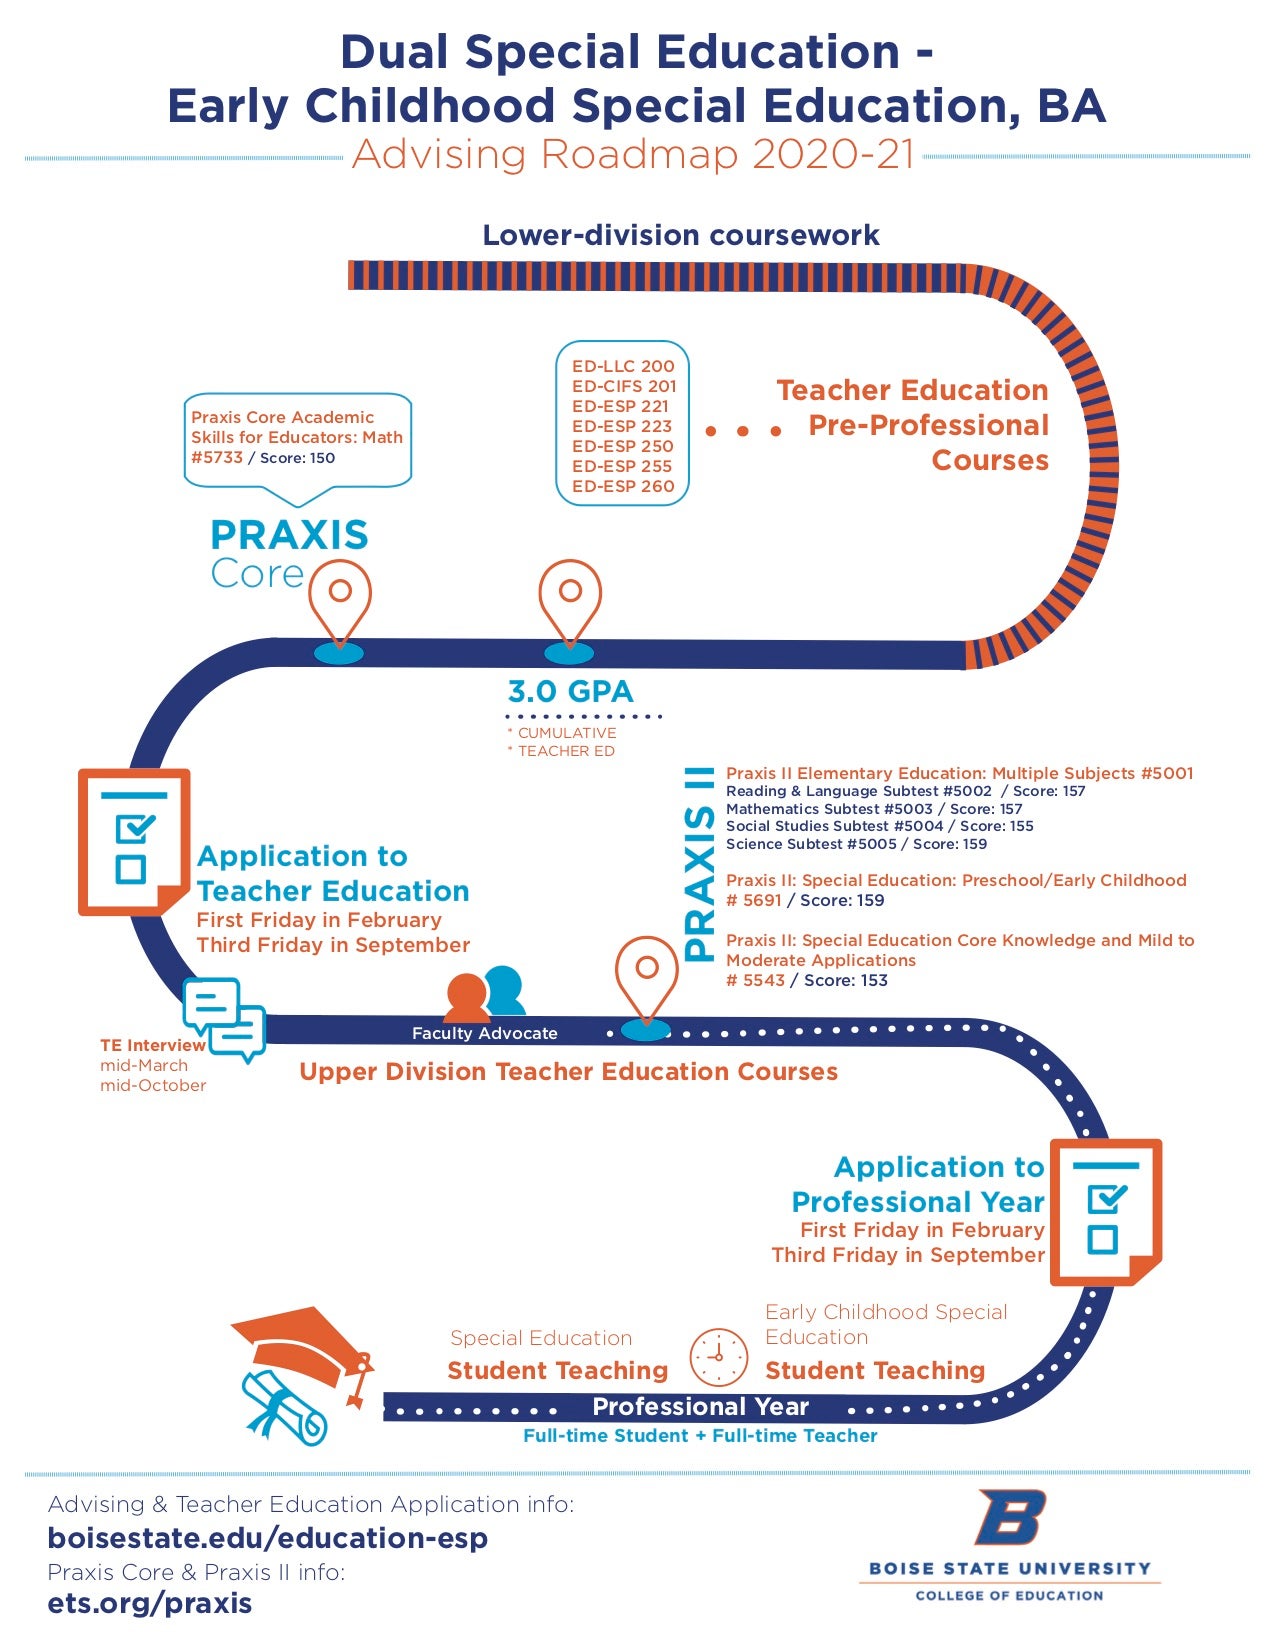 Advising roadmap infographic - full description on page